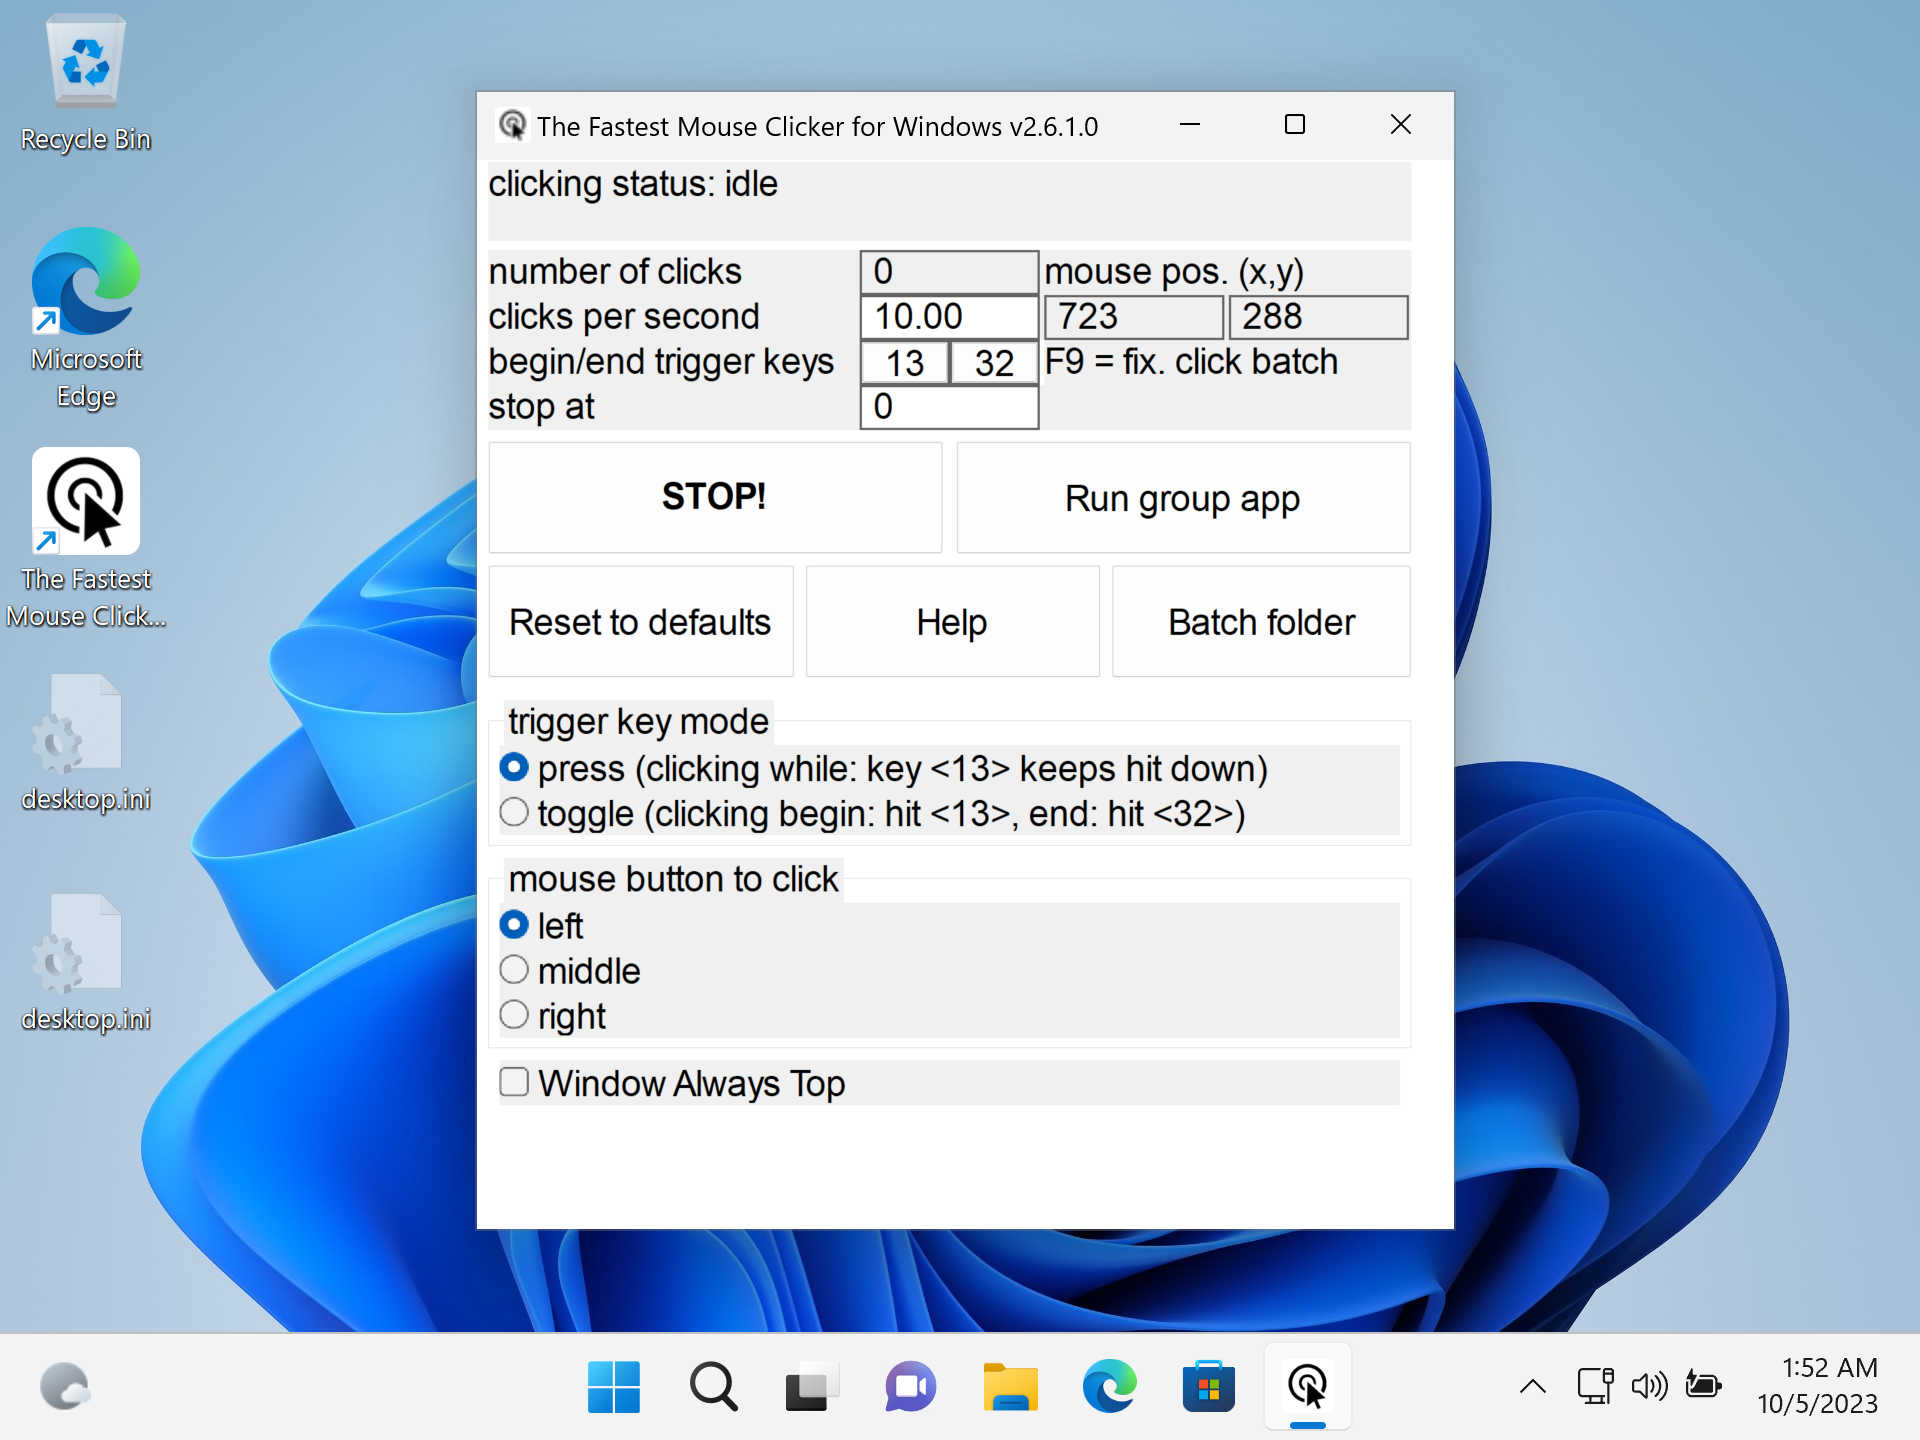 The Fastest Mouse Clicker for Windows version 2.6.1.0 - Brand new Windows 11 22H2 screenshot.